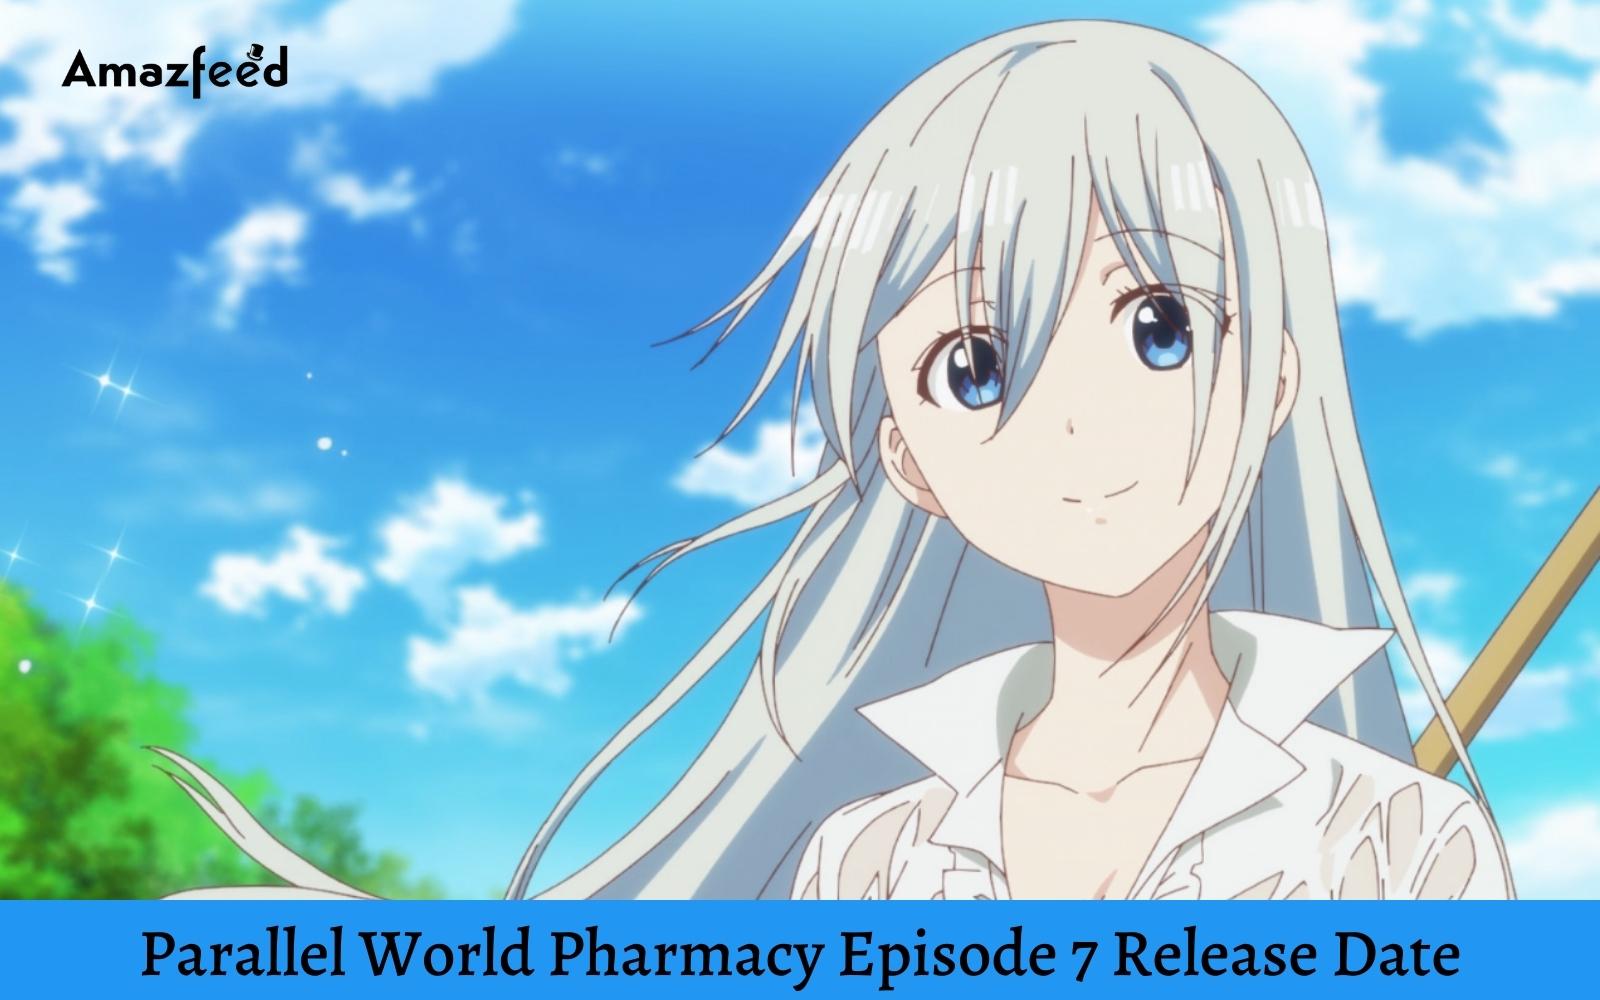 Parallel World Pharmacy Episode 7 : Countdown, Release Date, Spoiler, Where to Watch, Recap & Cast